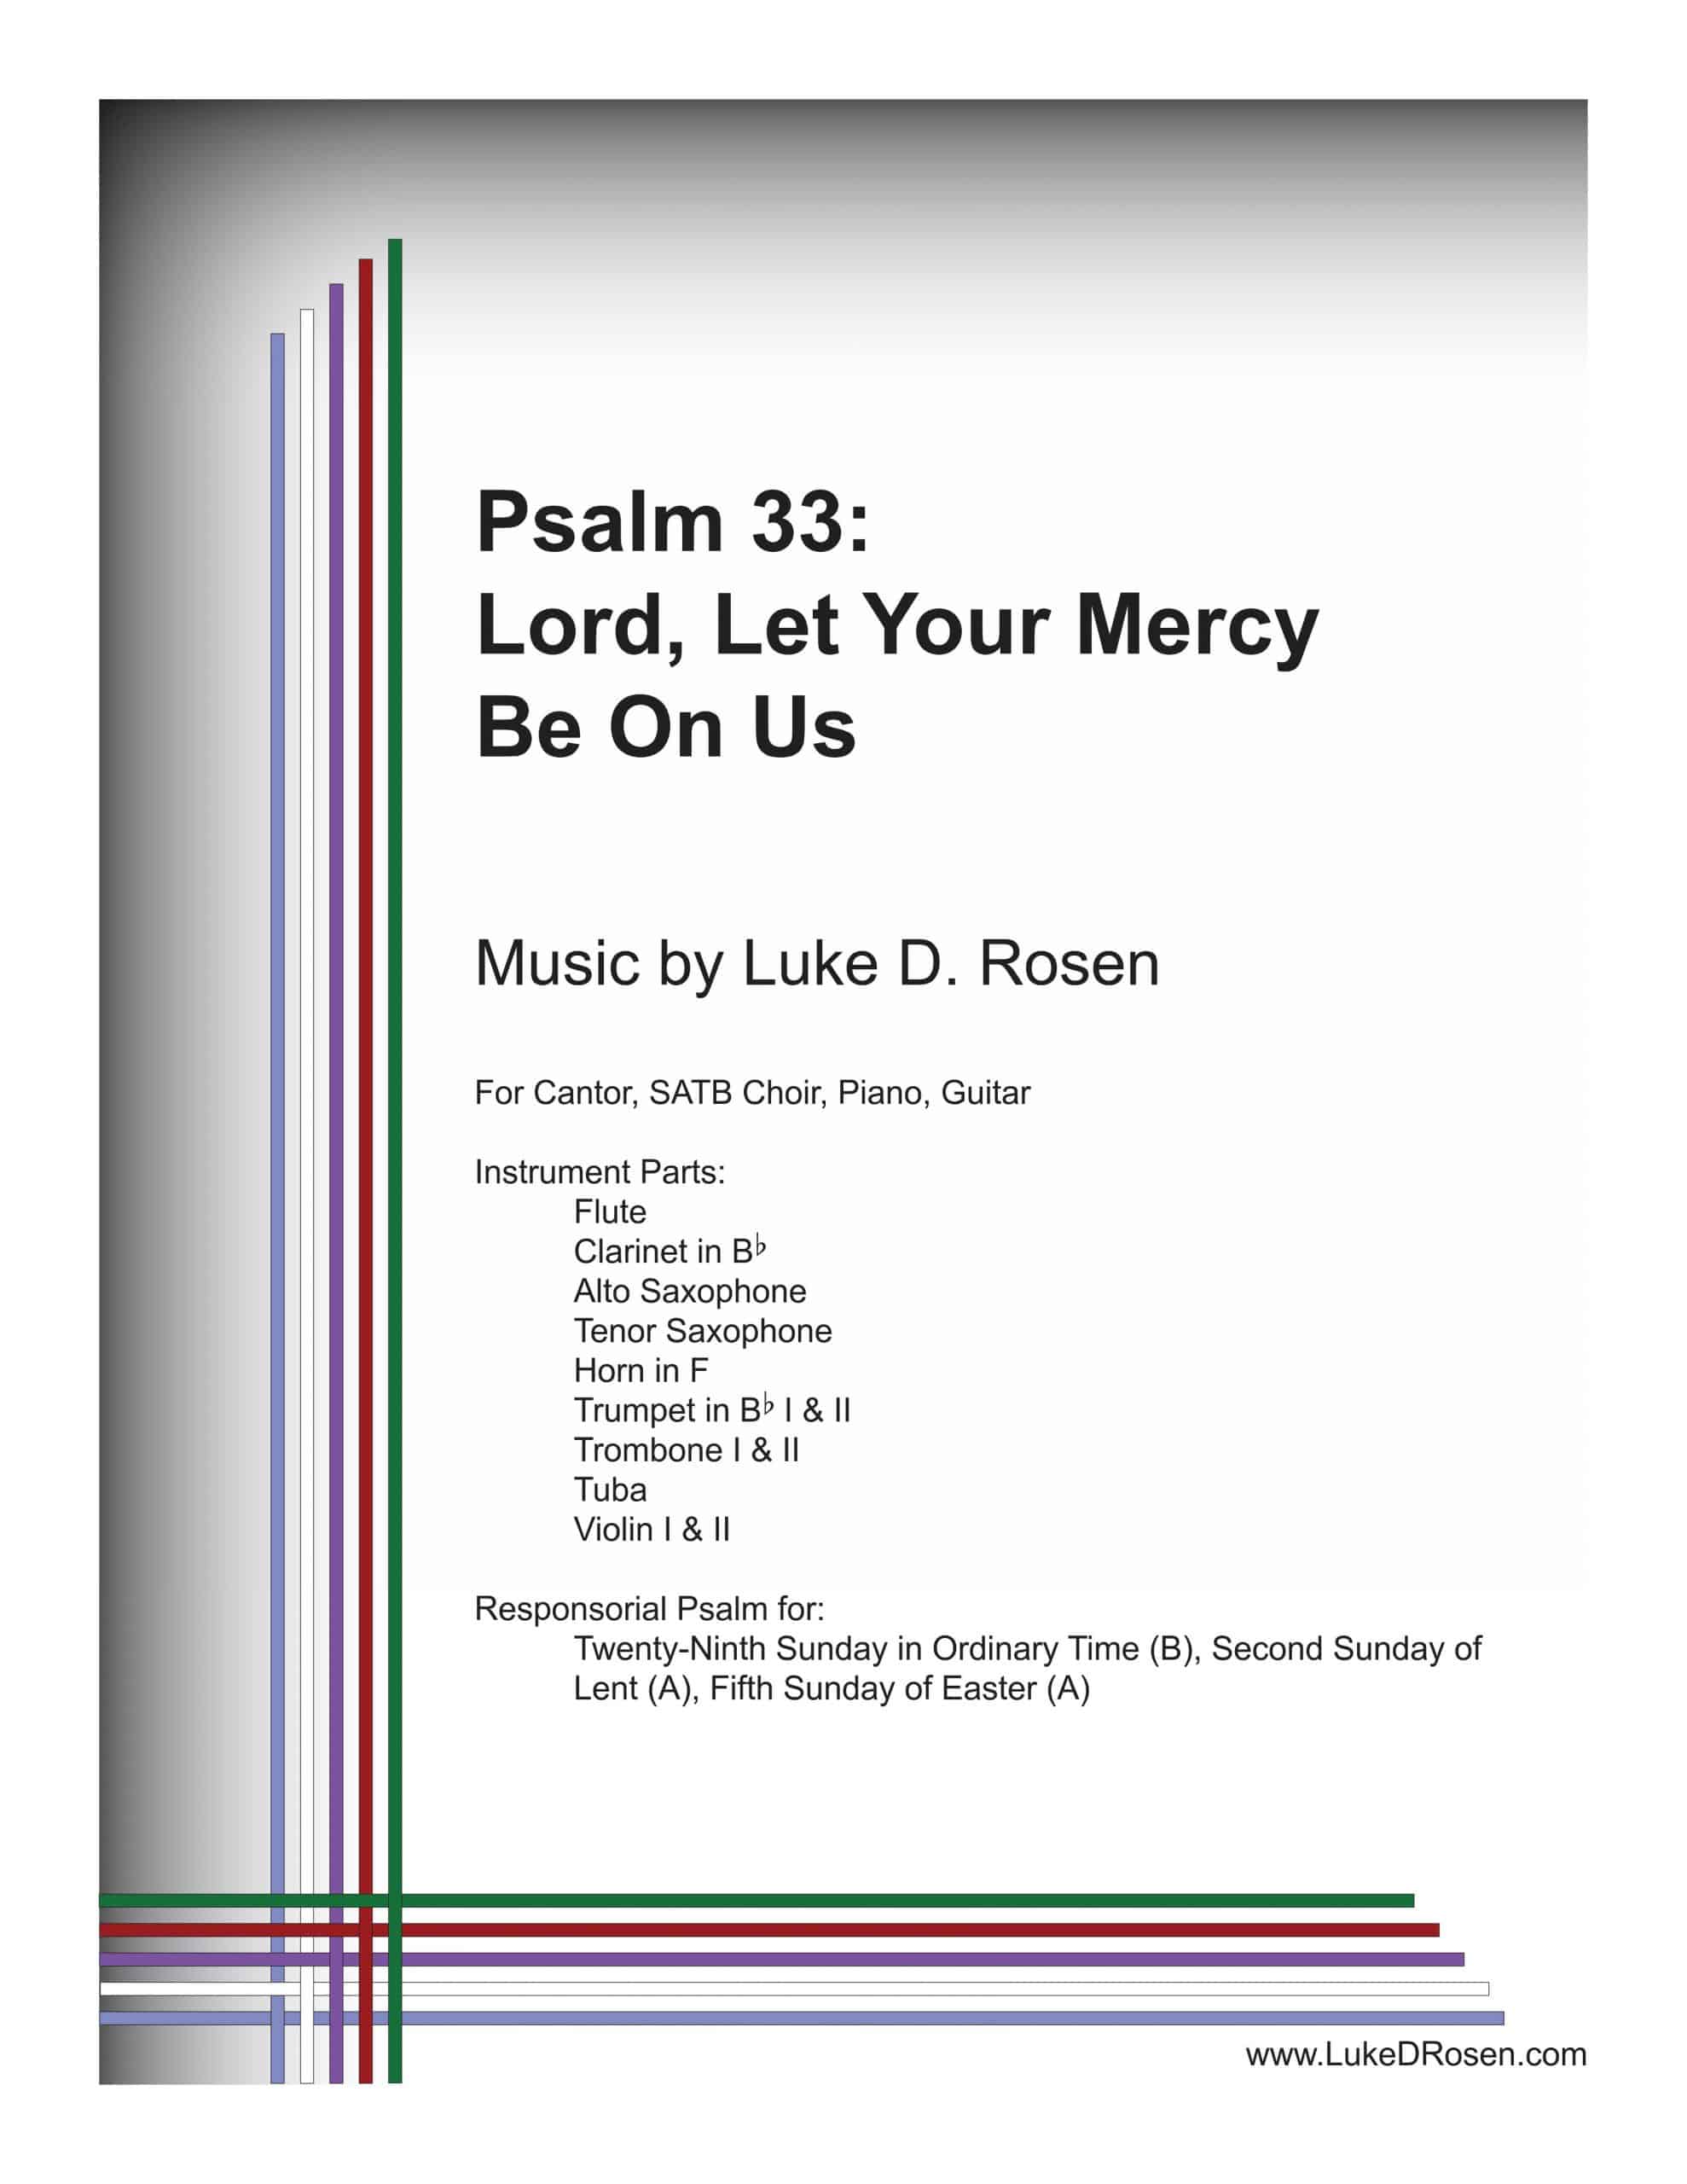 Psalm 33 – Lord, Let Your Mercy Be On Us (Rosen)